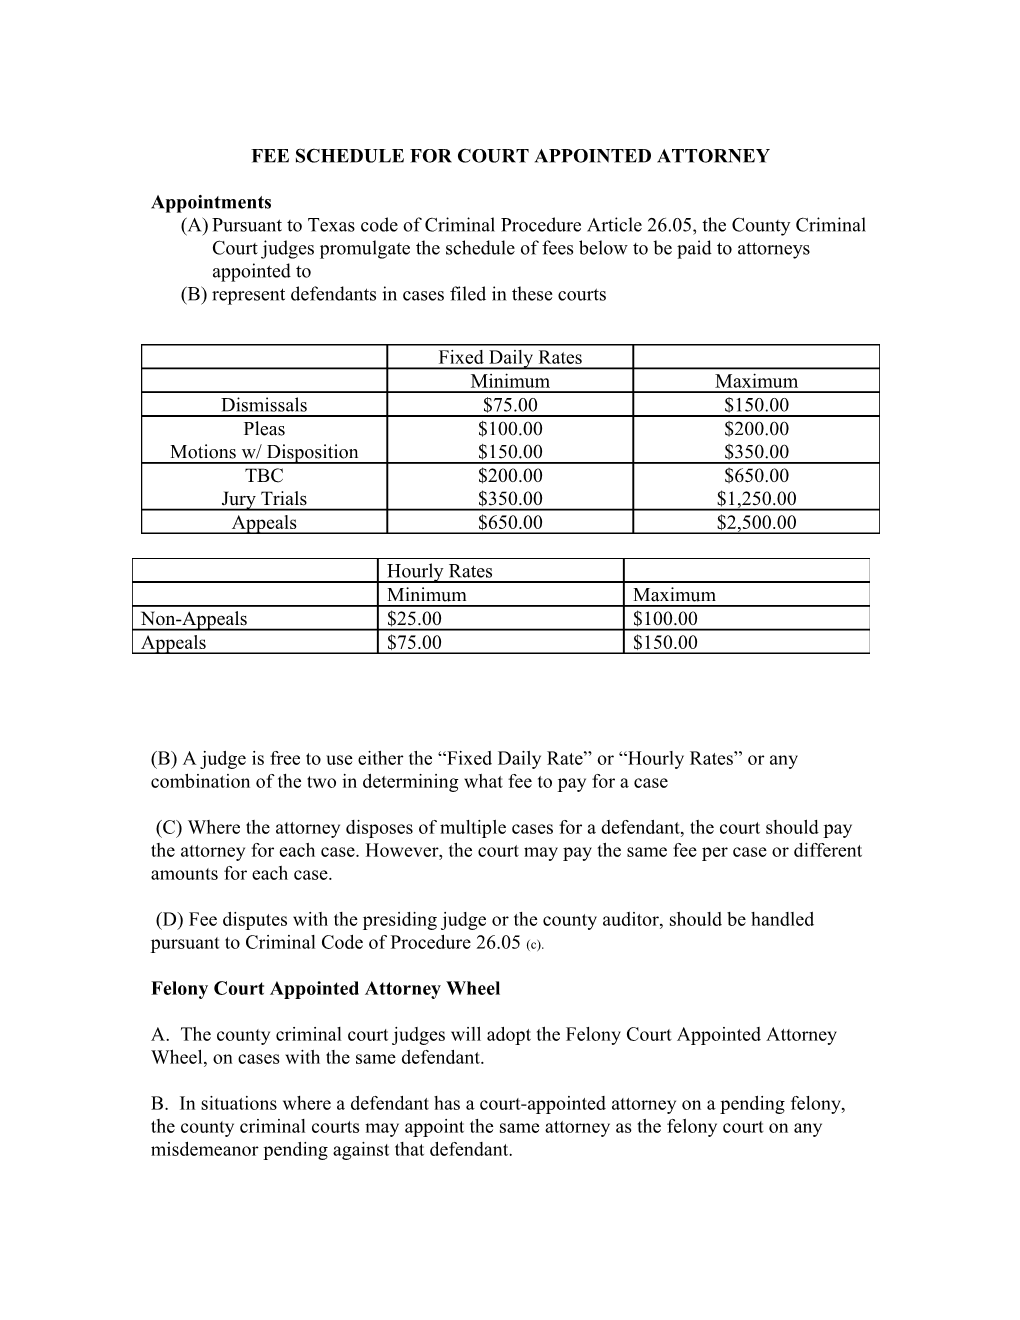 Fee Schedule for Court Appointed Attorney